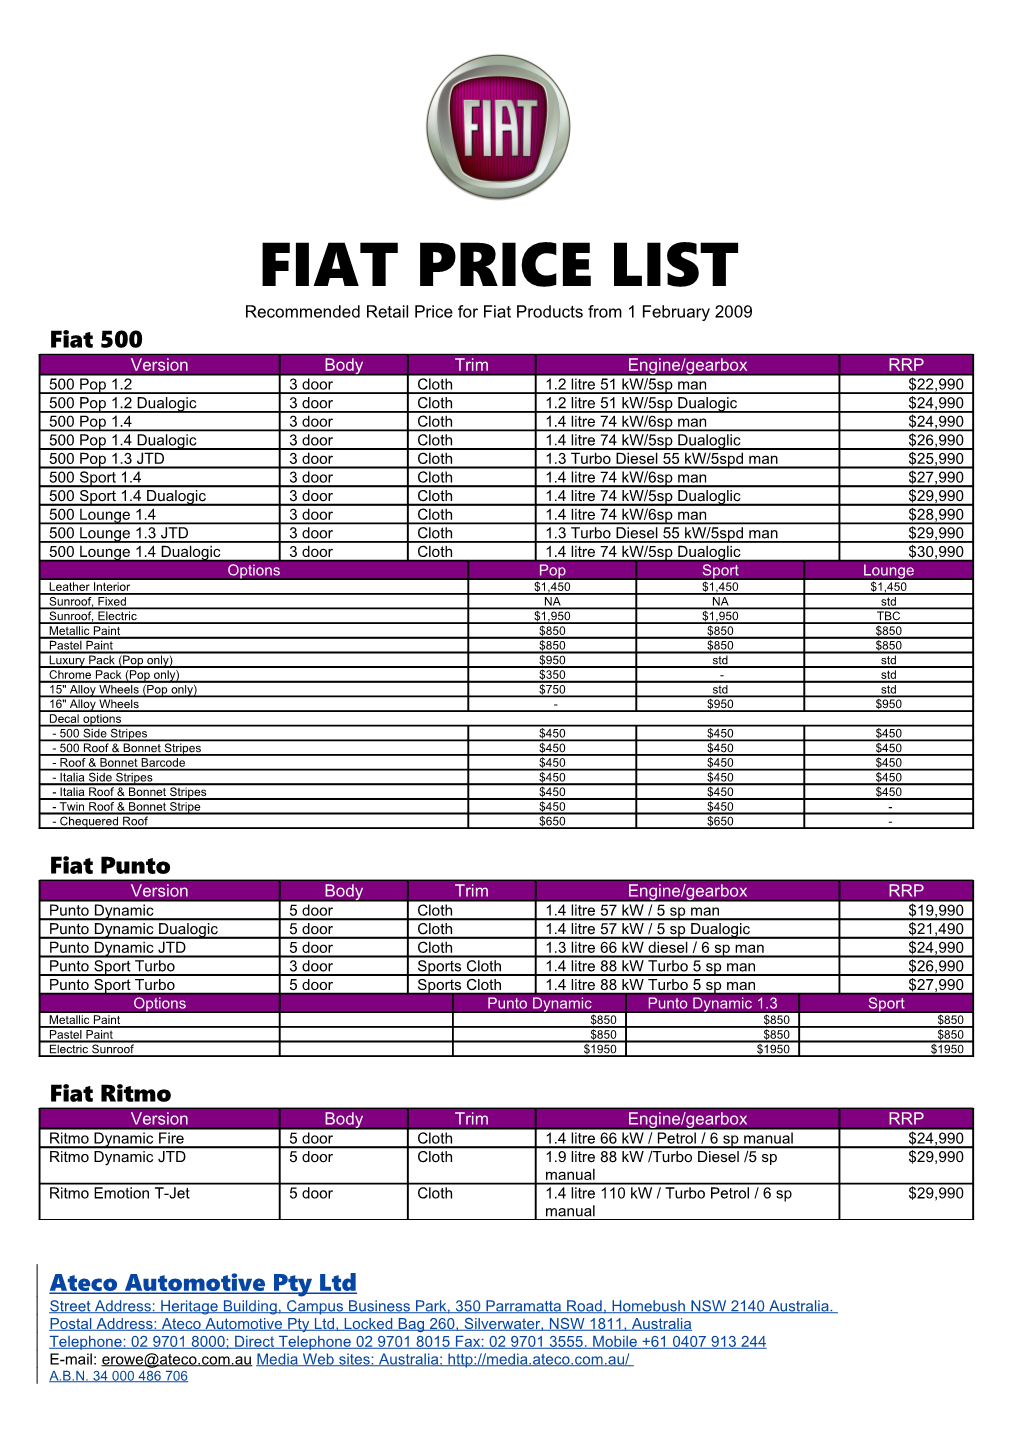 Recommended Retail Price for Fiat Products from 1 February 2009